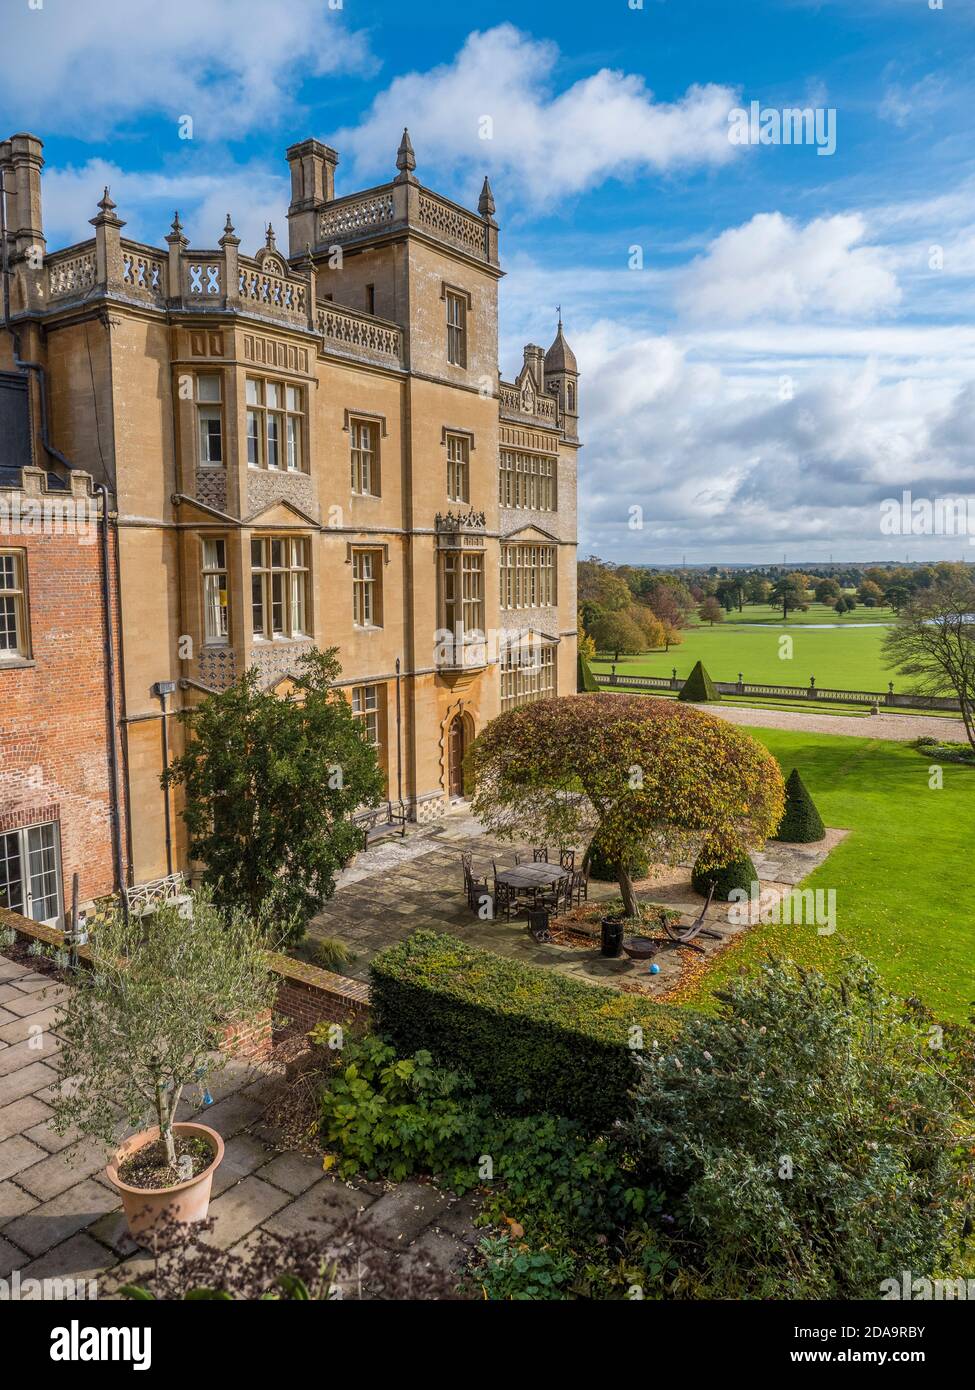 High View of Englefield House and gardens, Englefield, Thale, Reading, Berkshire, England, UK, GB. Stock Photo